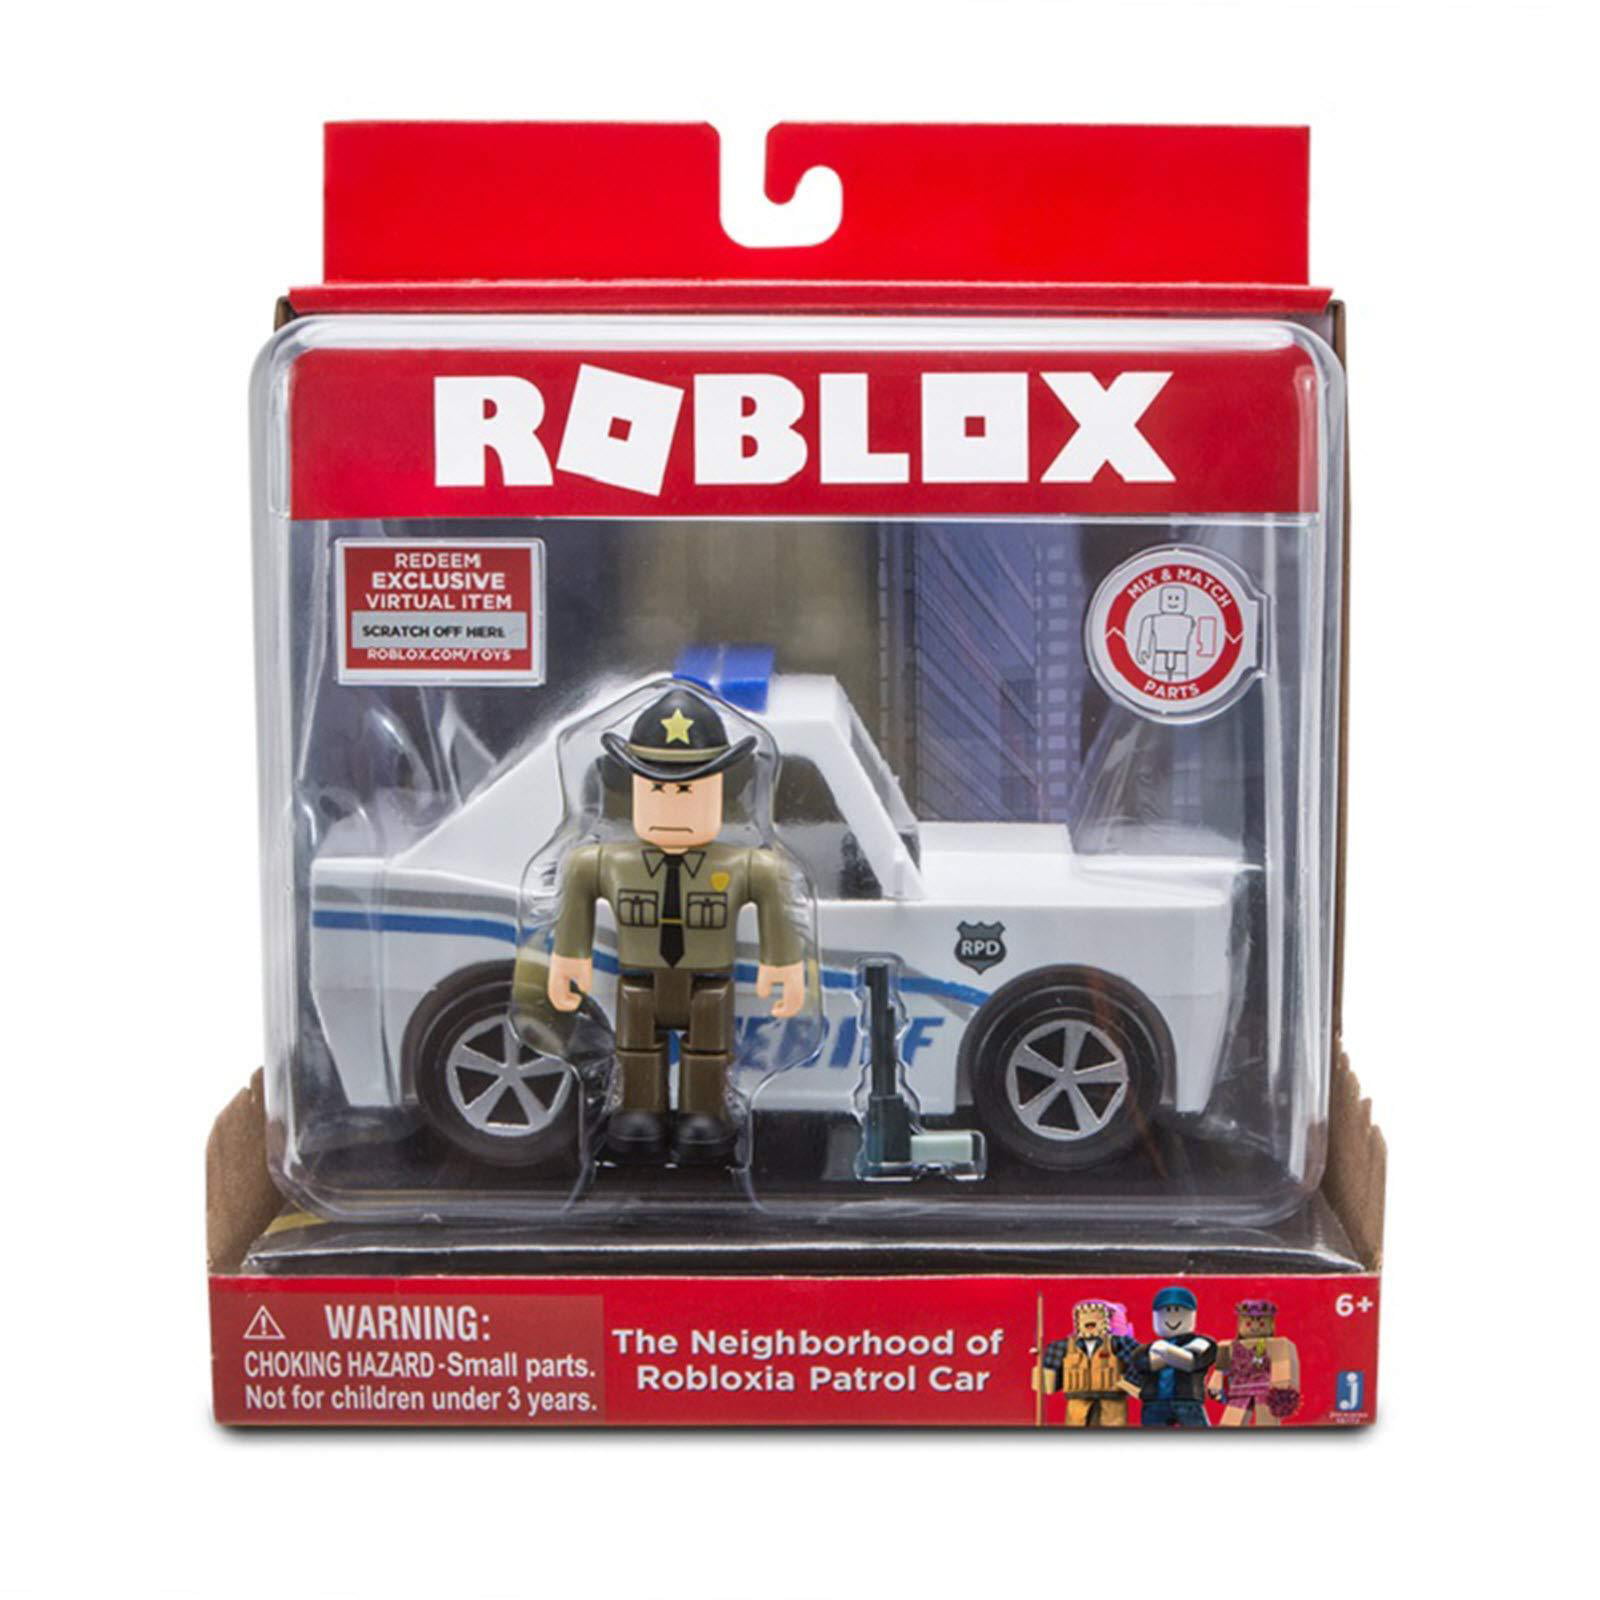 Roblox Action Collection The Neighborhood Of Robloxia Patrol Car Vehicle Includes Exclusive Virtual Item Walmart Com Walmart Com - baby clothes neighborhood of robloxian roblox codes